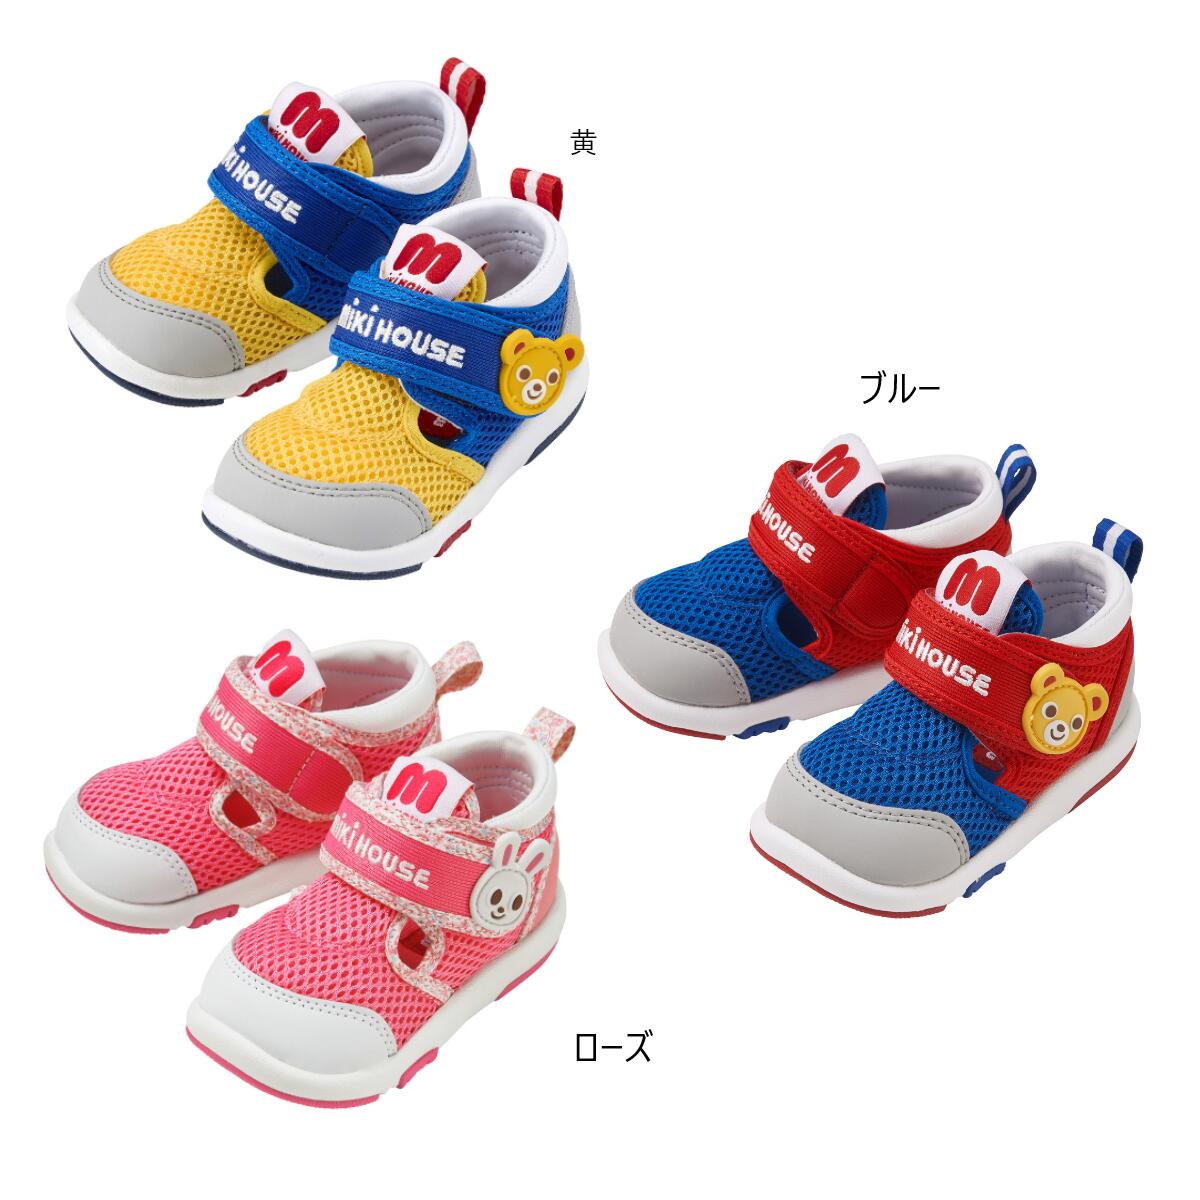 Japan MIKIHOUSE Baotou mesh sandals red and blue bear (12.5-15.5CM) 12-9303-389